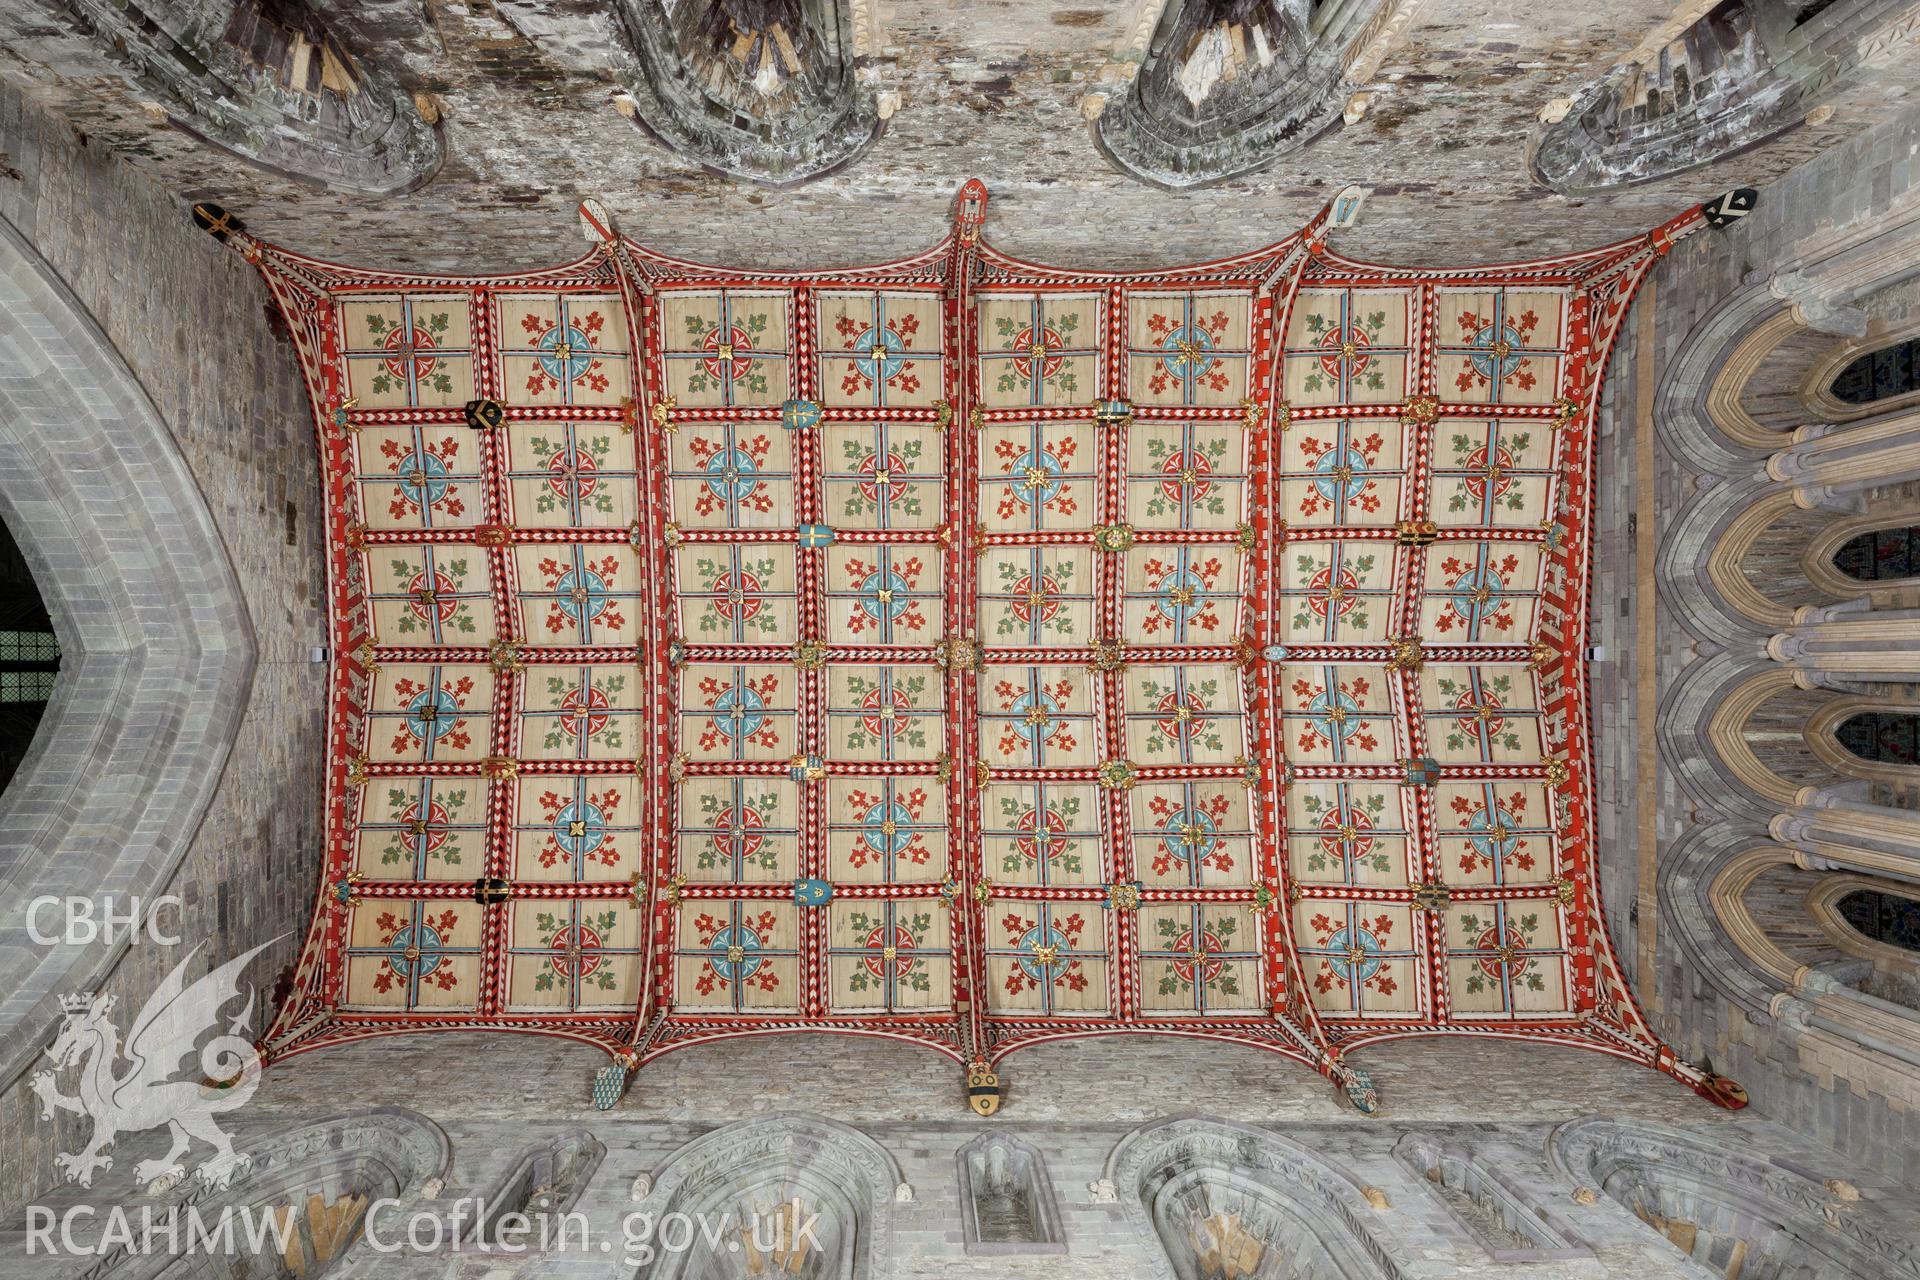 Ceiling of chancel